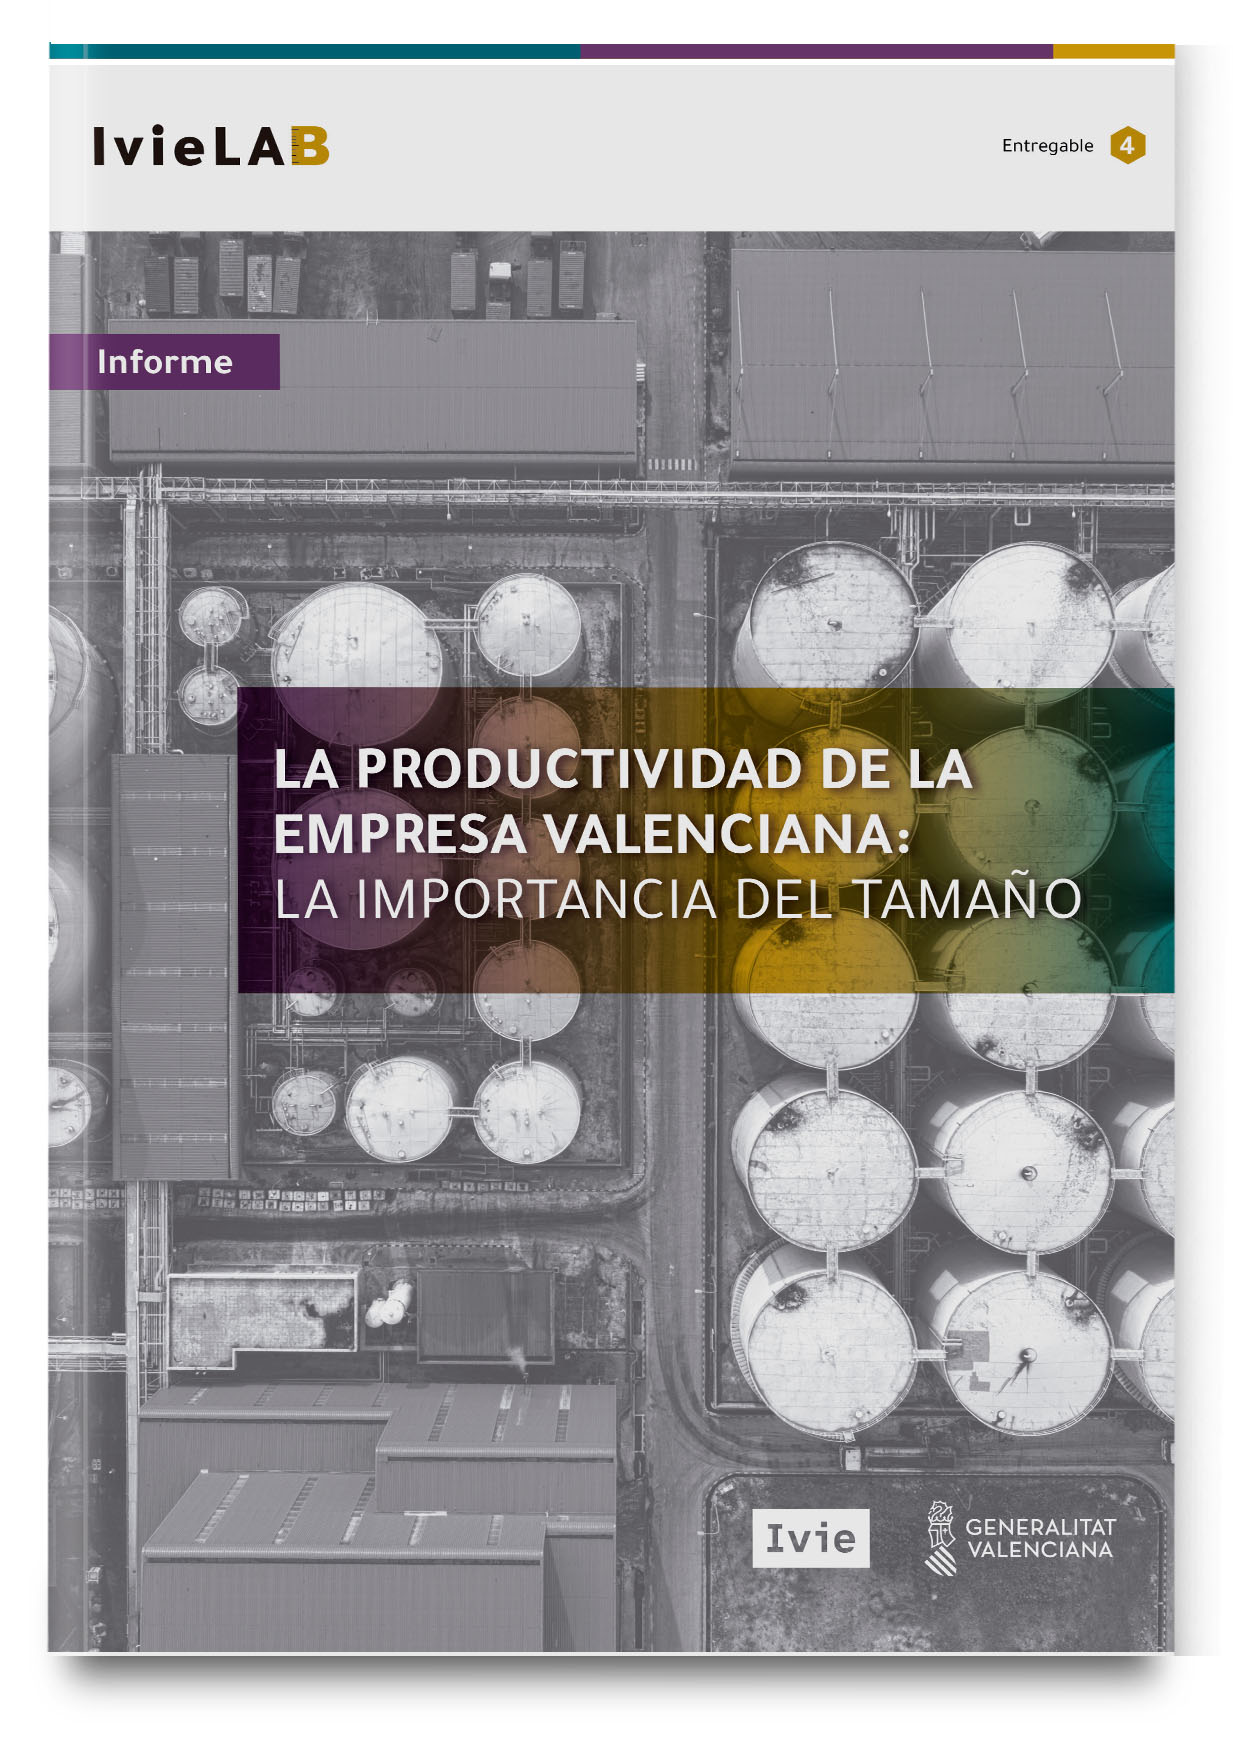 IvieLAB. Valencian firm productivity: The importance of size